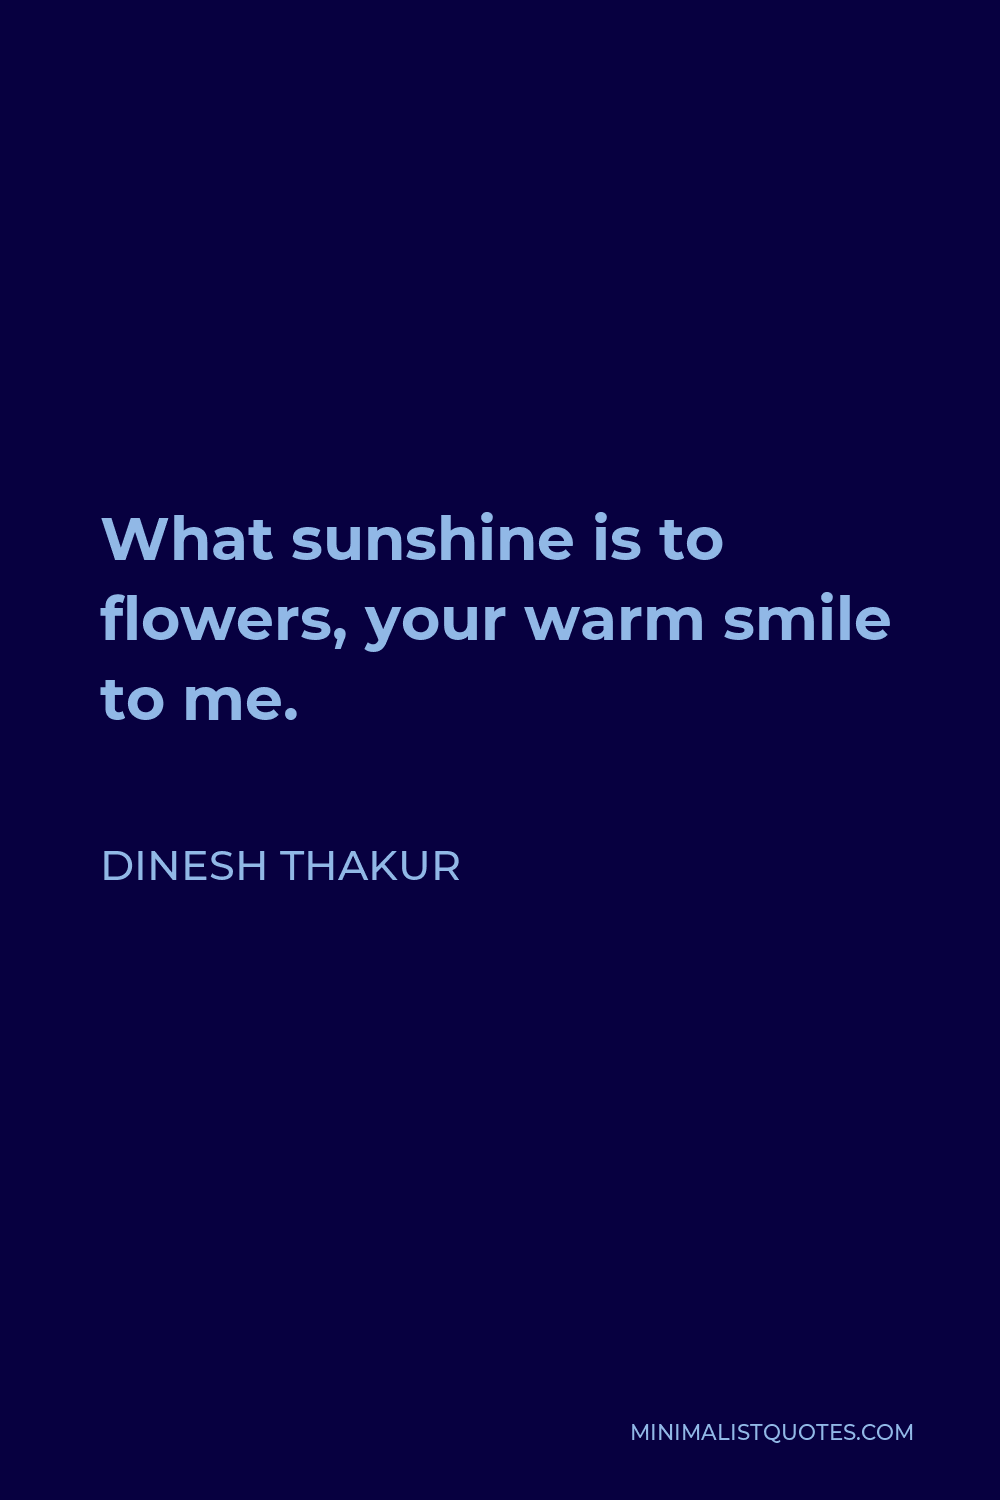 Dinesh Thakur Quote - What sunshine is to flowers, your warm smile to me.